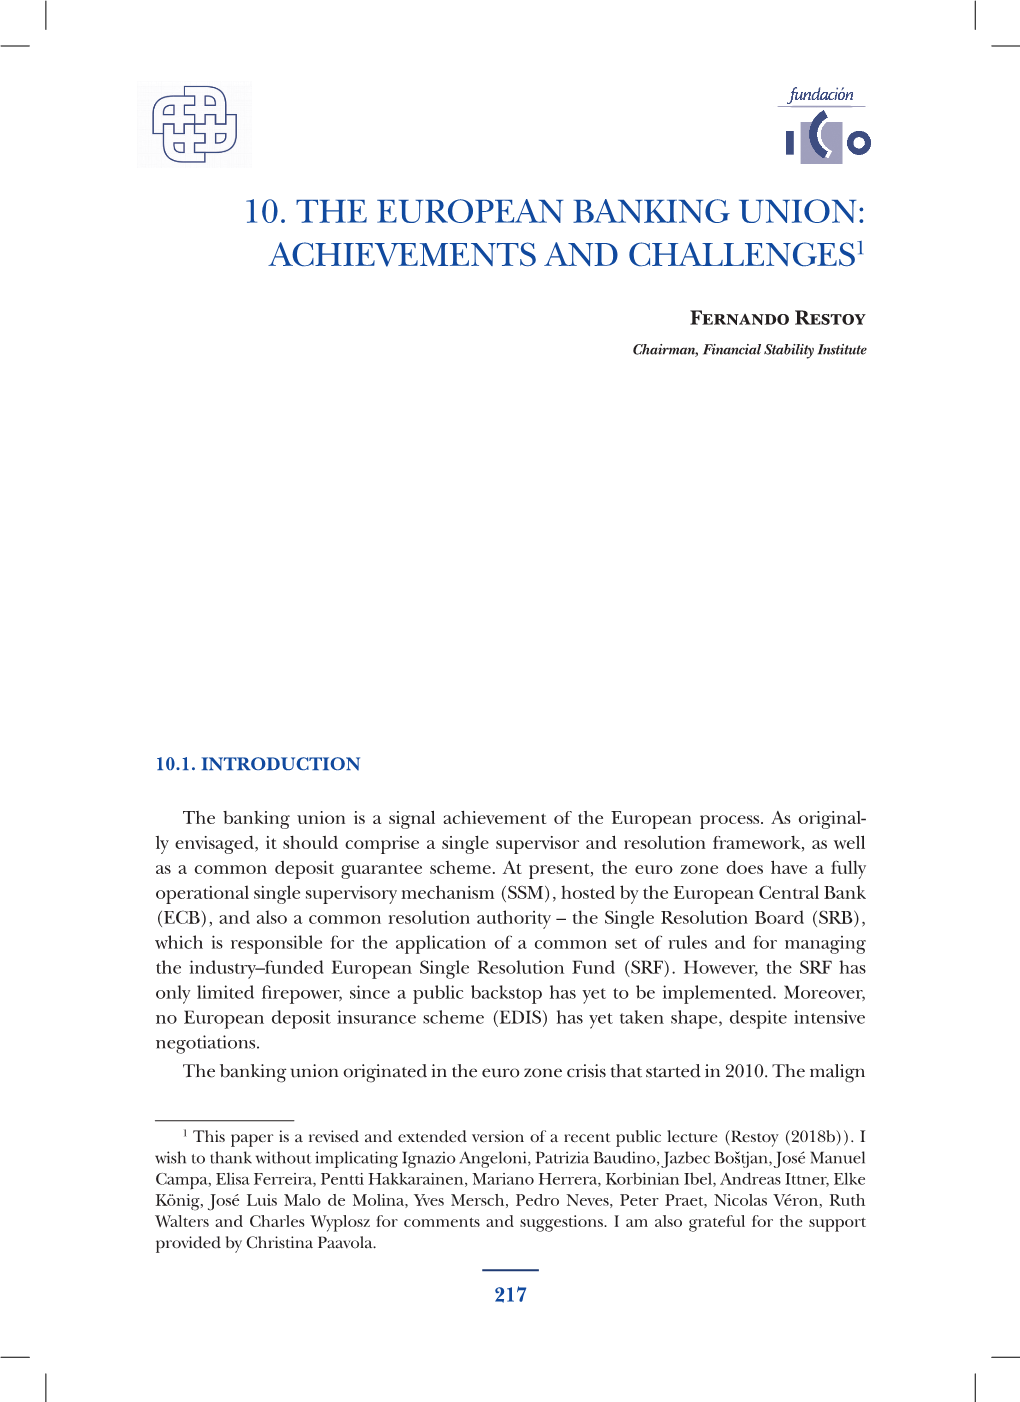 10. the European Banking Union: Achievements and Challenges1